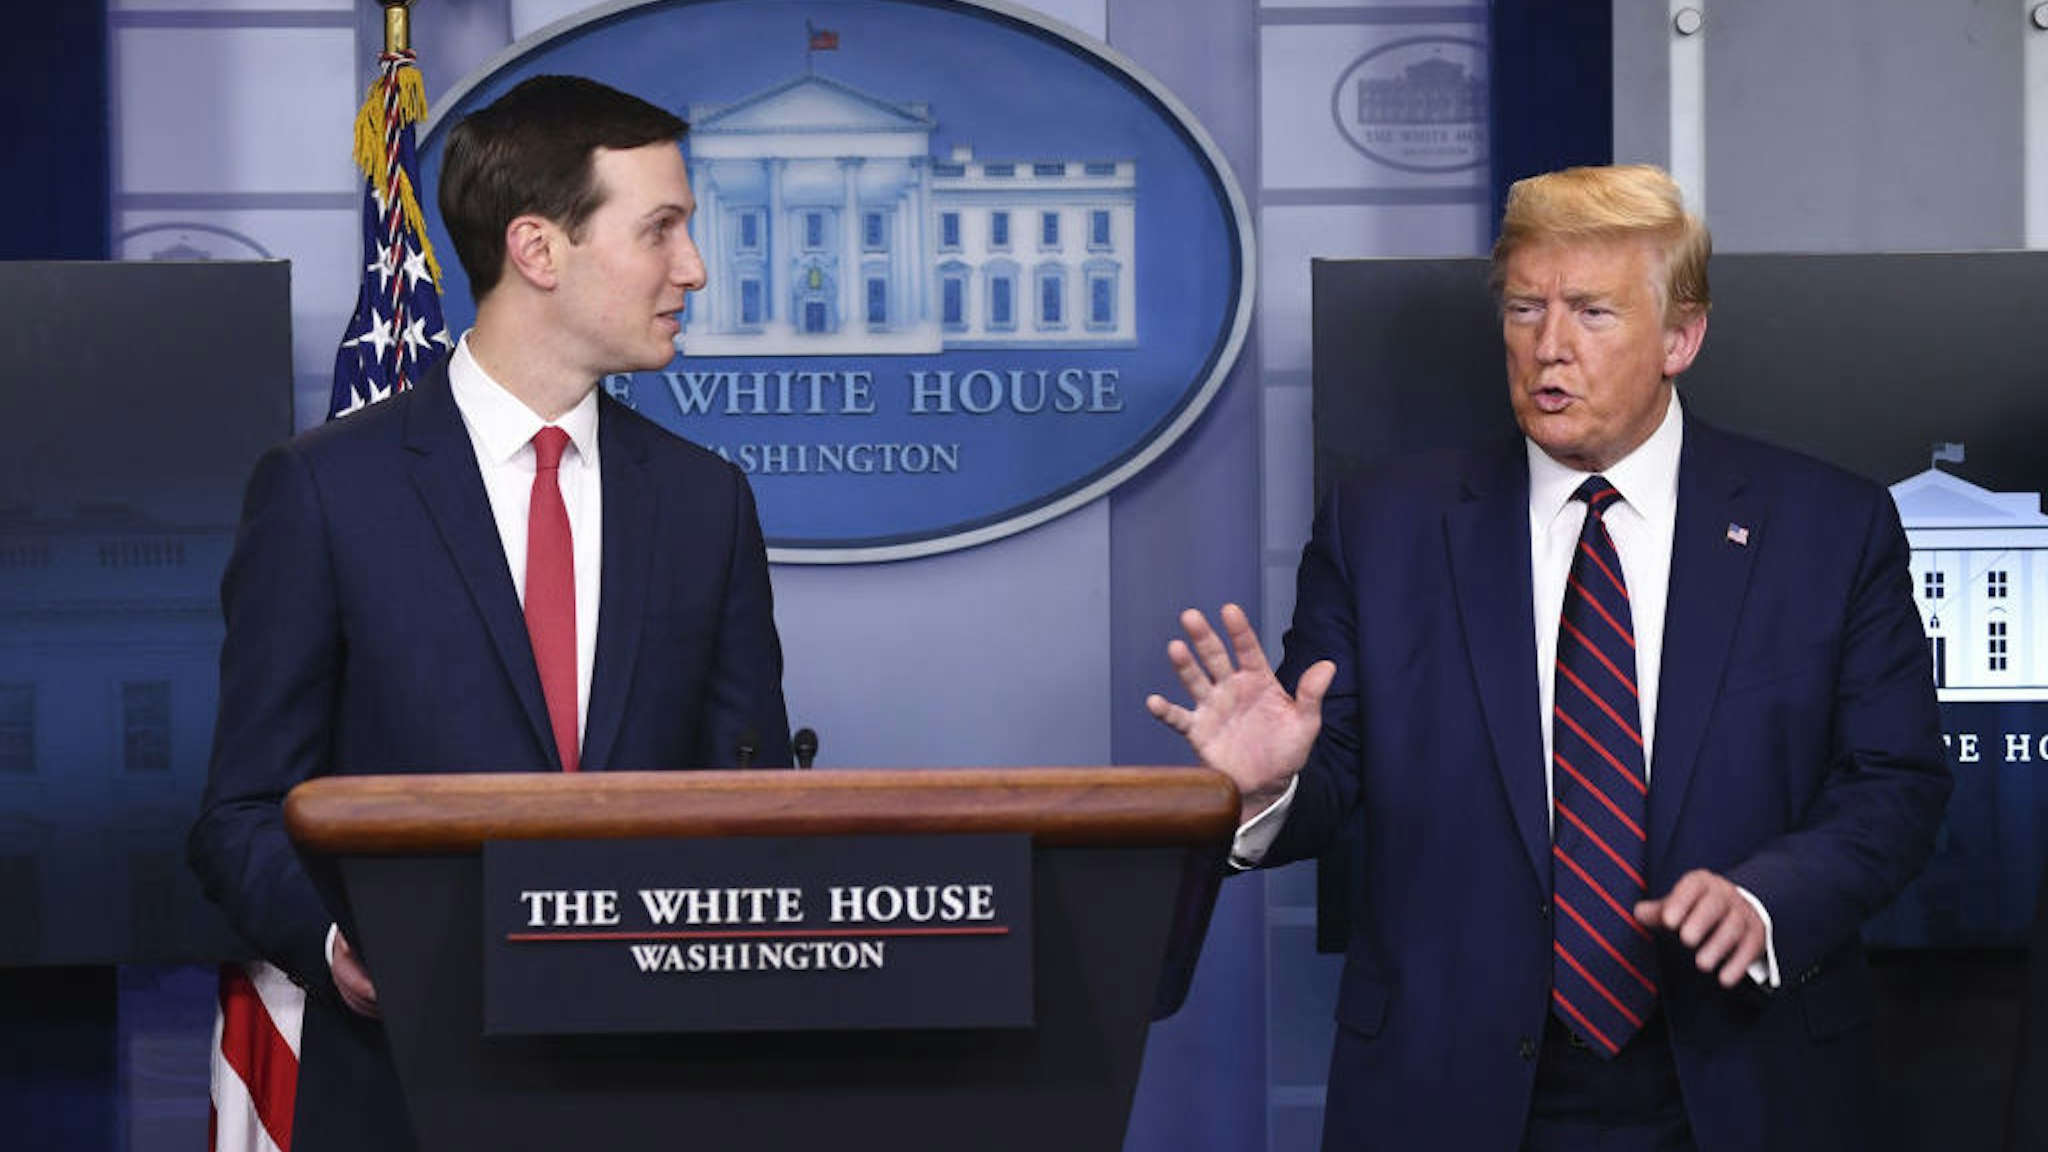 President Donald Trump, right, speaks as Jared Kushner, senior White House adviser, listens during a Coronavirus Task Force news conference at the White House in Washington, D.C., U.S., on Thursday, April 2, 2020. Trump tested negative again for the coronavirus and has no symptoms, a White House doctor said. Photographer: Kevin Dietsch/UPI/Bloomberg